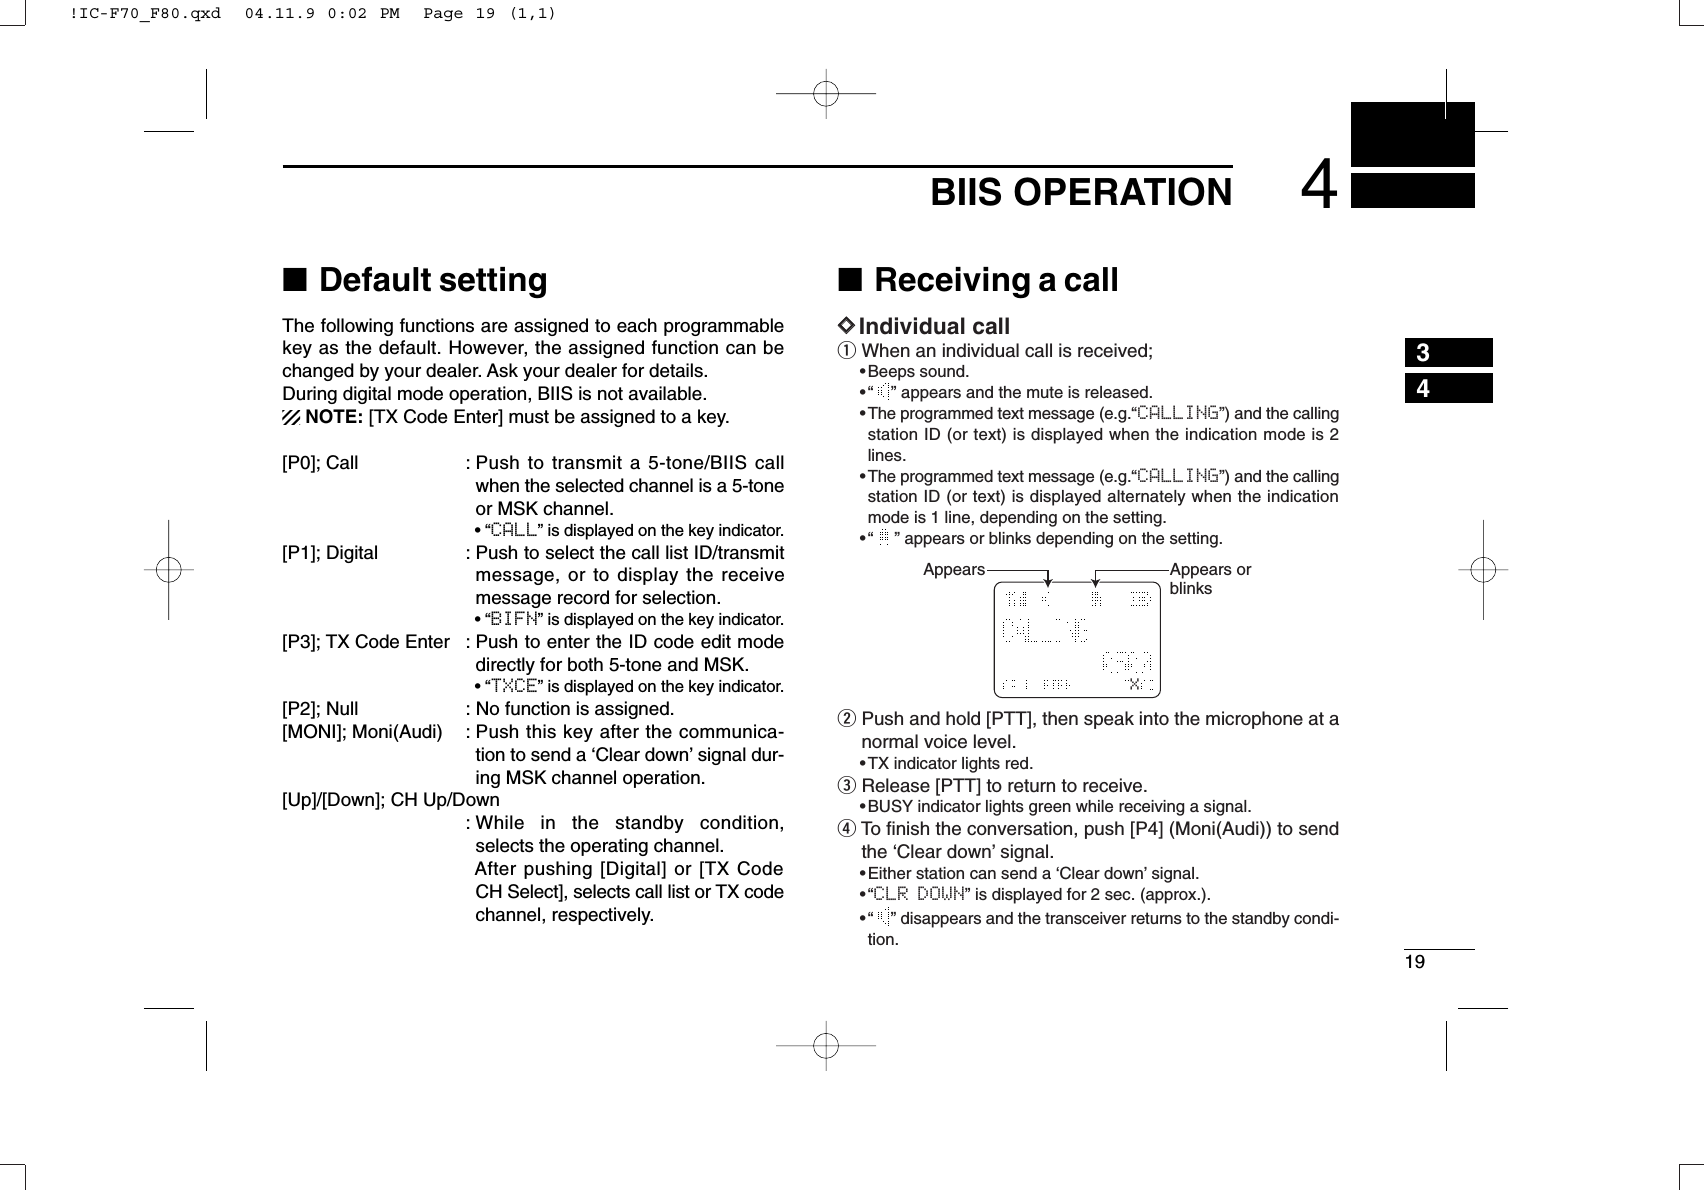 194BIIS OPERATION34■Default settingThe following functions are assigned to each programmablekey as the default. However, the assigned function can bechanged by your dealer. Ask your dealer for details.During digital mode operation, BIIS is not available.NOTE: [TX Code Enter] must be assigned to a key.[P0]; Call : Push to transmit a 5-tone/BIIS callwhen the selected channel is a 5-toneor MSK channel.• “CALL” is displayed on the key indicator.[P1]; Digital : Push to select the call list ID/transmitmessage, or to display the receivemessage record for selection.• “BIFN” is displayed on the key indicator.[P3]; TX Code Enter : Push to enter the ID code edit modedirectly for both 5-tone and MSK.• “TXCE” is displayed on the key indicator.[P2]; Null : No function is assigned.[MONI]; Moni(Audi) : Push this key after the communica-tion to send a ‘Clear down’signal dur-ing MSK channel operation.[Up]/[Down]; CH Up/Down: While in the standby condition,selects the operating channel.After pushing [Digital] or [TX CodeCH Select], selects call list or TX codechannel, respectively.■Receiving a callDDIndividual callqWhen an individual call is received;•Beeps sound.•“ ” appears and the mute is released.•The programmed text message (e.g.“CALLING”) and the callingstation ID (or text) is displayed when the indication mode is 2lines.•The programmed text message (e.g.“CALLING”) and the callingstation ID (or text) is displayed alternately when the indicationmode is 1 line, depending on the setting.•“ ” appears or blinks depending on the setting.wPush and hold [PTT], then speak into the microphone at anormal voice level.•TX indicator lights red.eRelease [PTT] to return to receive.•BUSY indicator lights green while receiving a signal.rTo ﬁnish the conversation, push [P4] (Moni(Audi)) to sendthe ‘Clear down’signal.•Either station can send a ‘Clear down’signal.•“CLR DOWN” is displayed for 2 sec. (approx.).•“ ” disappears and the transceiver returns to the standby condi-tion.XAppears Appears or blinks!IC-F70_F80.qxd  04.11.9 0:02 PM  Page 19 (1,1)